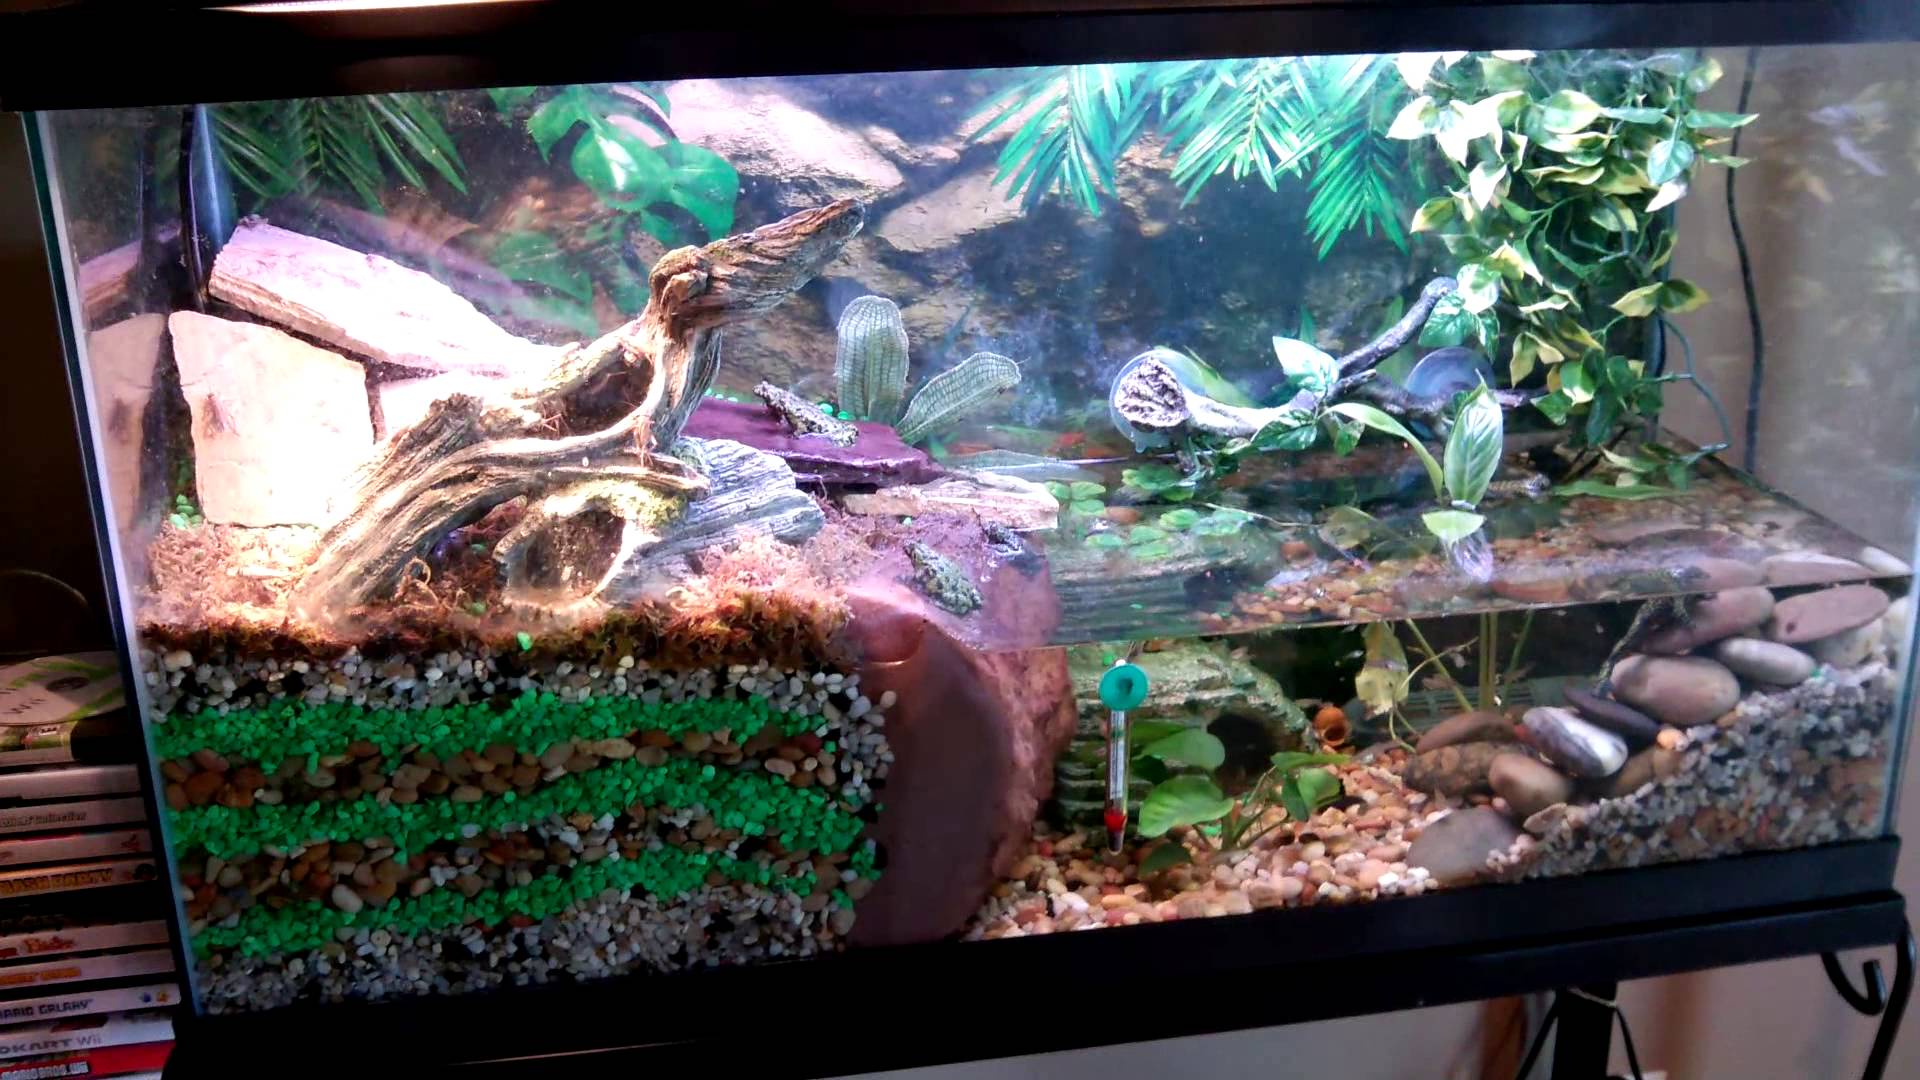 Second fire belly toad tank - YouTube